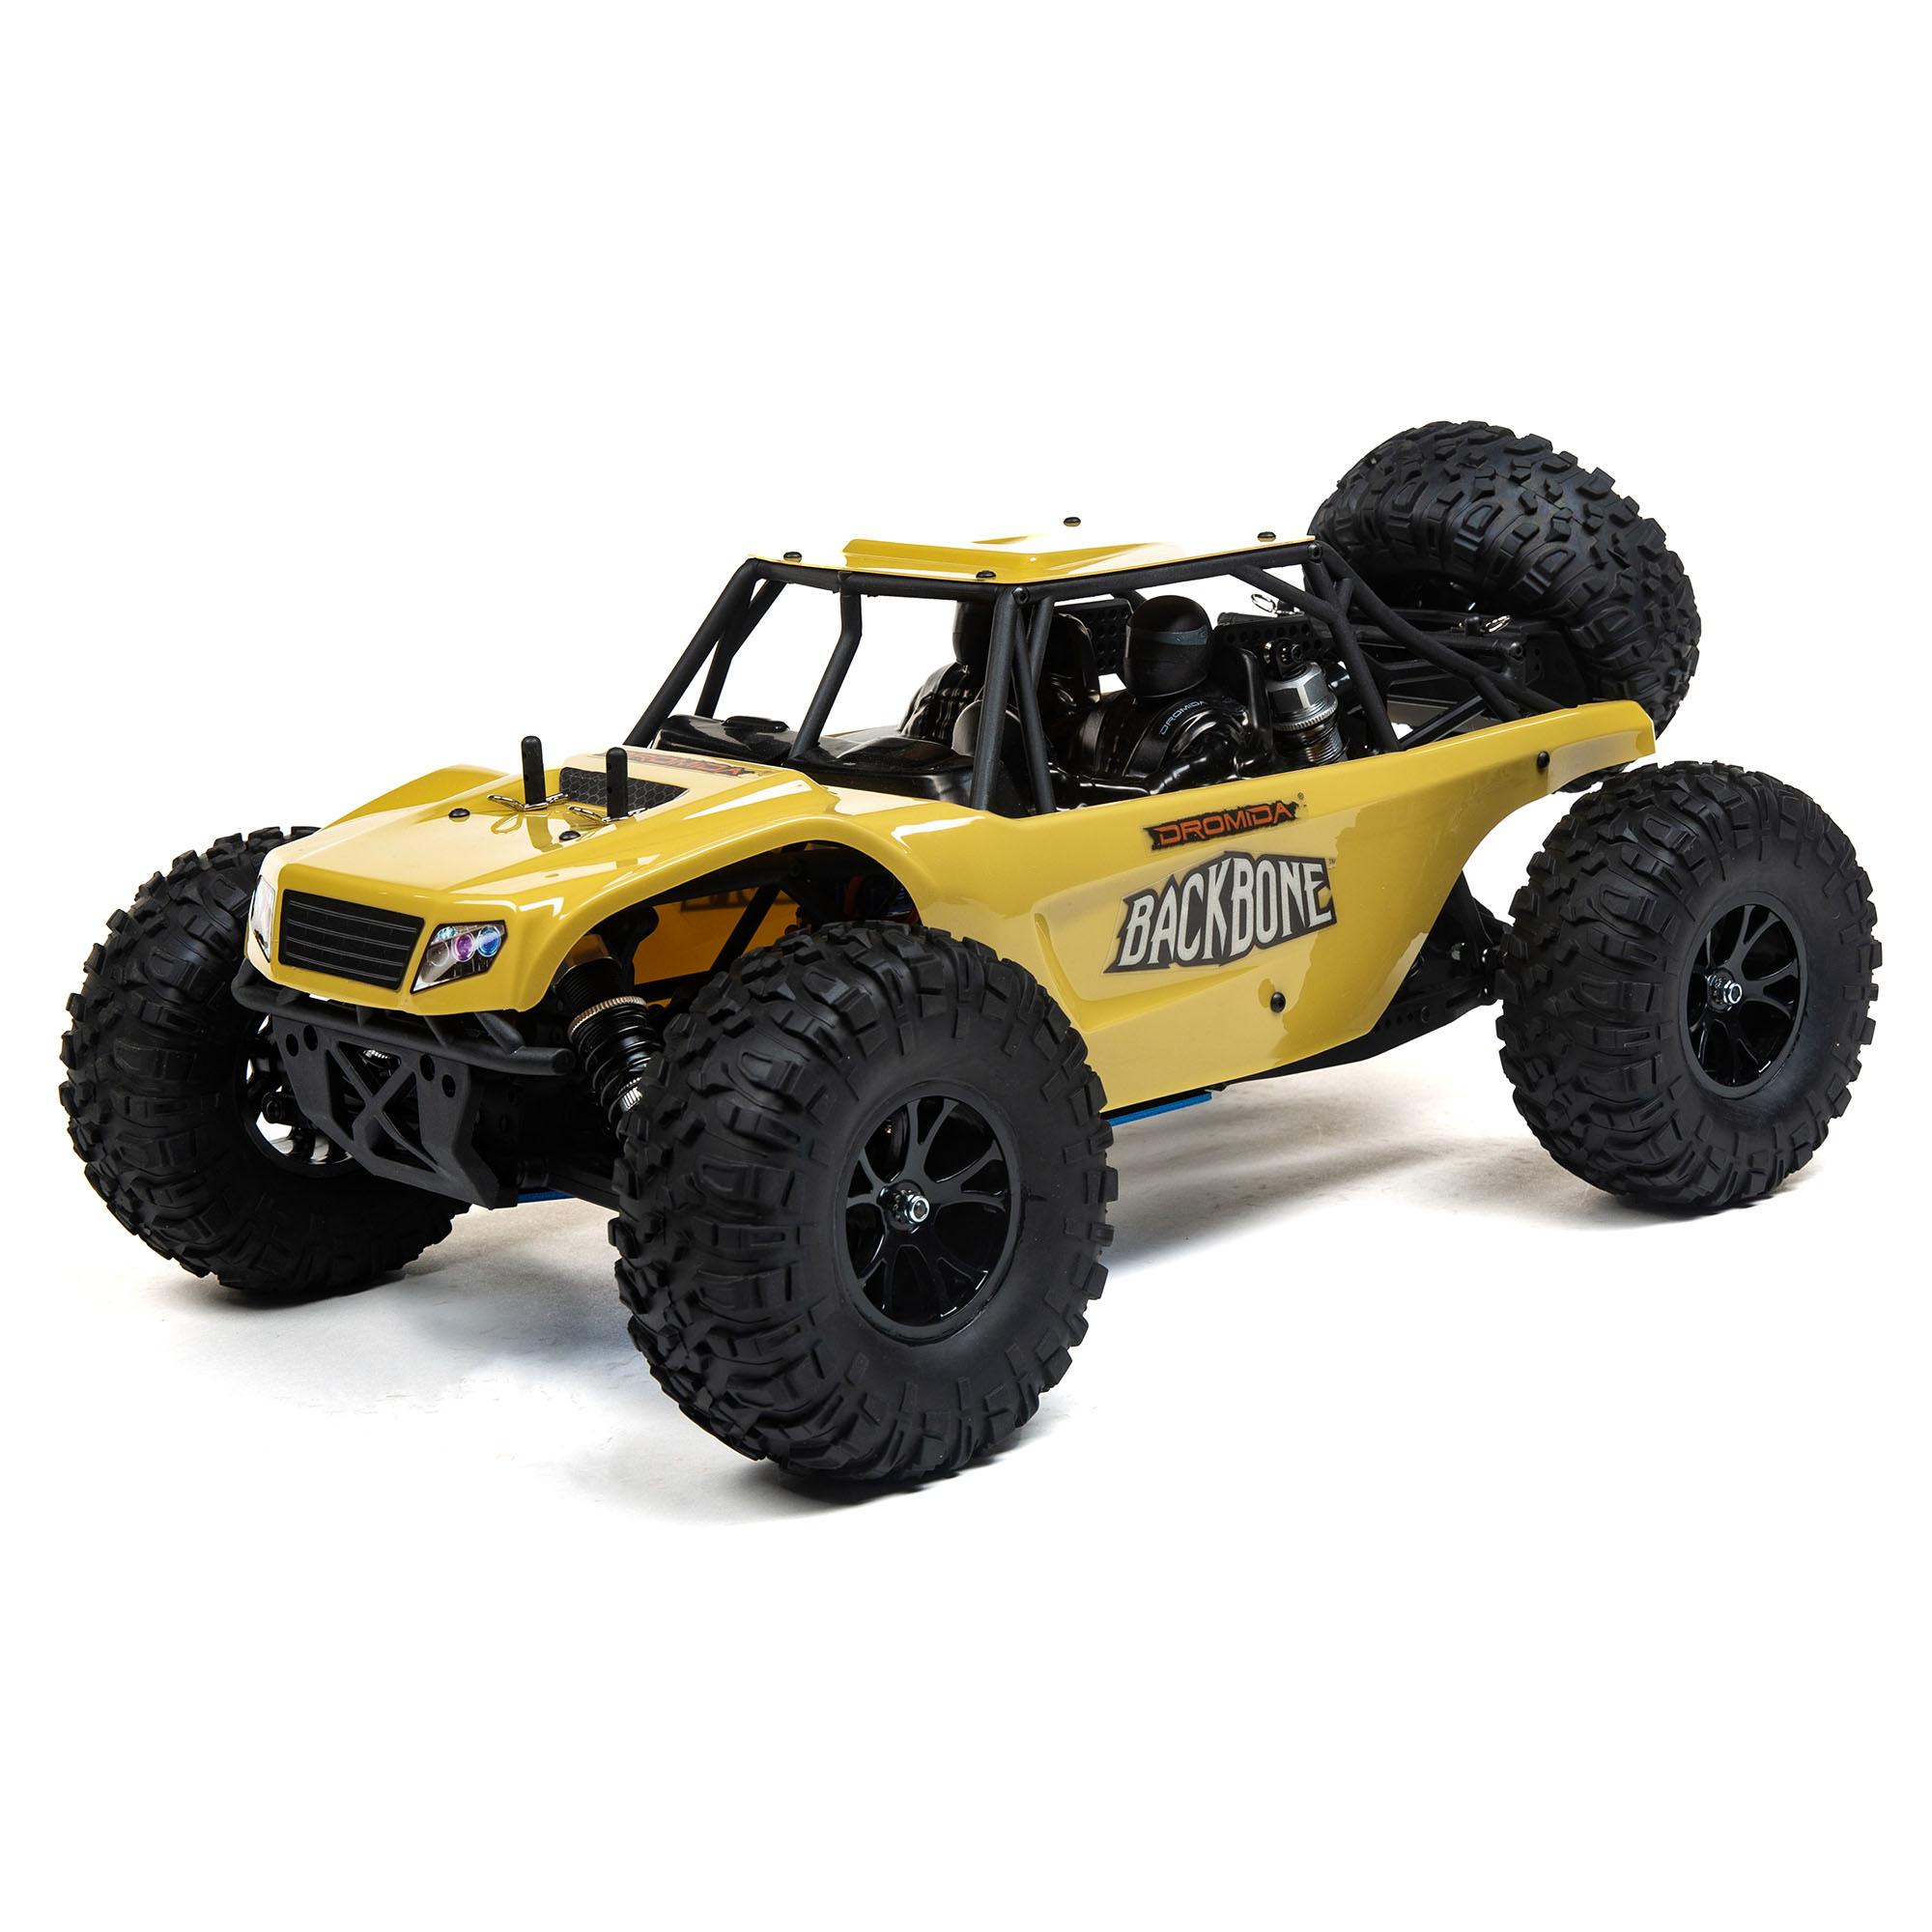 Dromida Rc Car: Durable, Lightweight, and Fast: The Attractive Design of Dromida RC Car